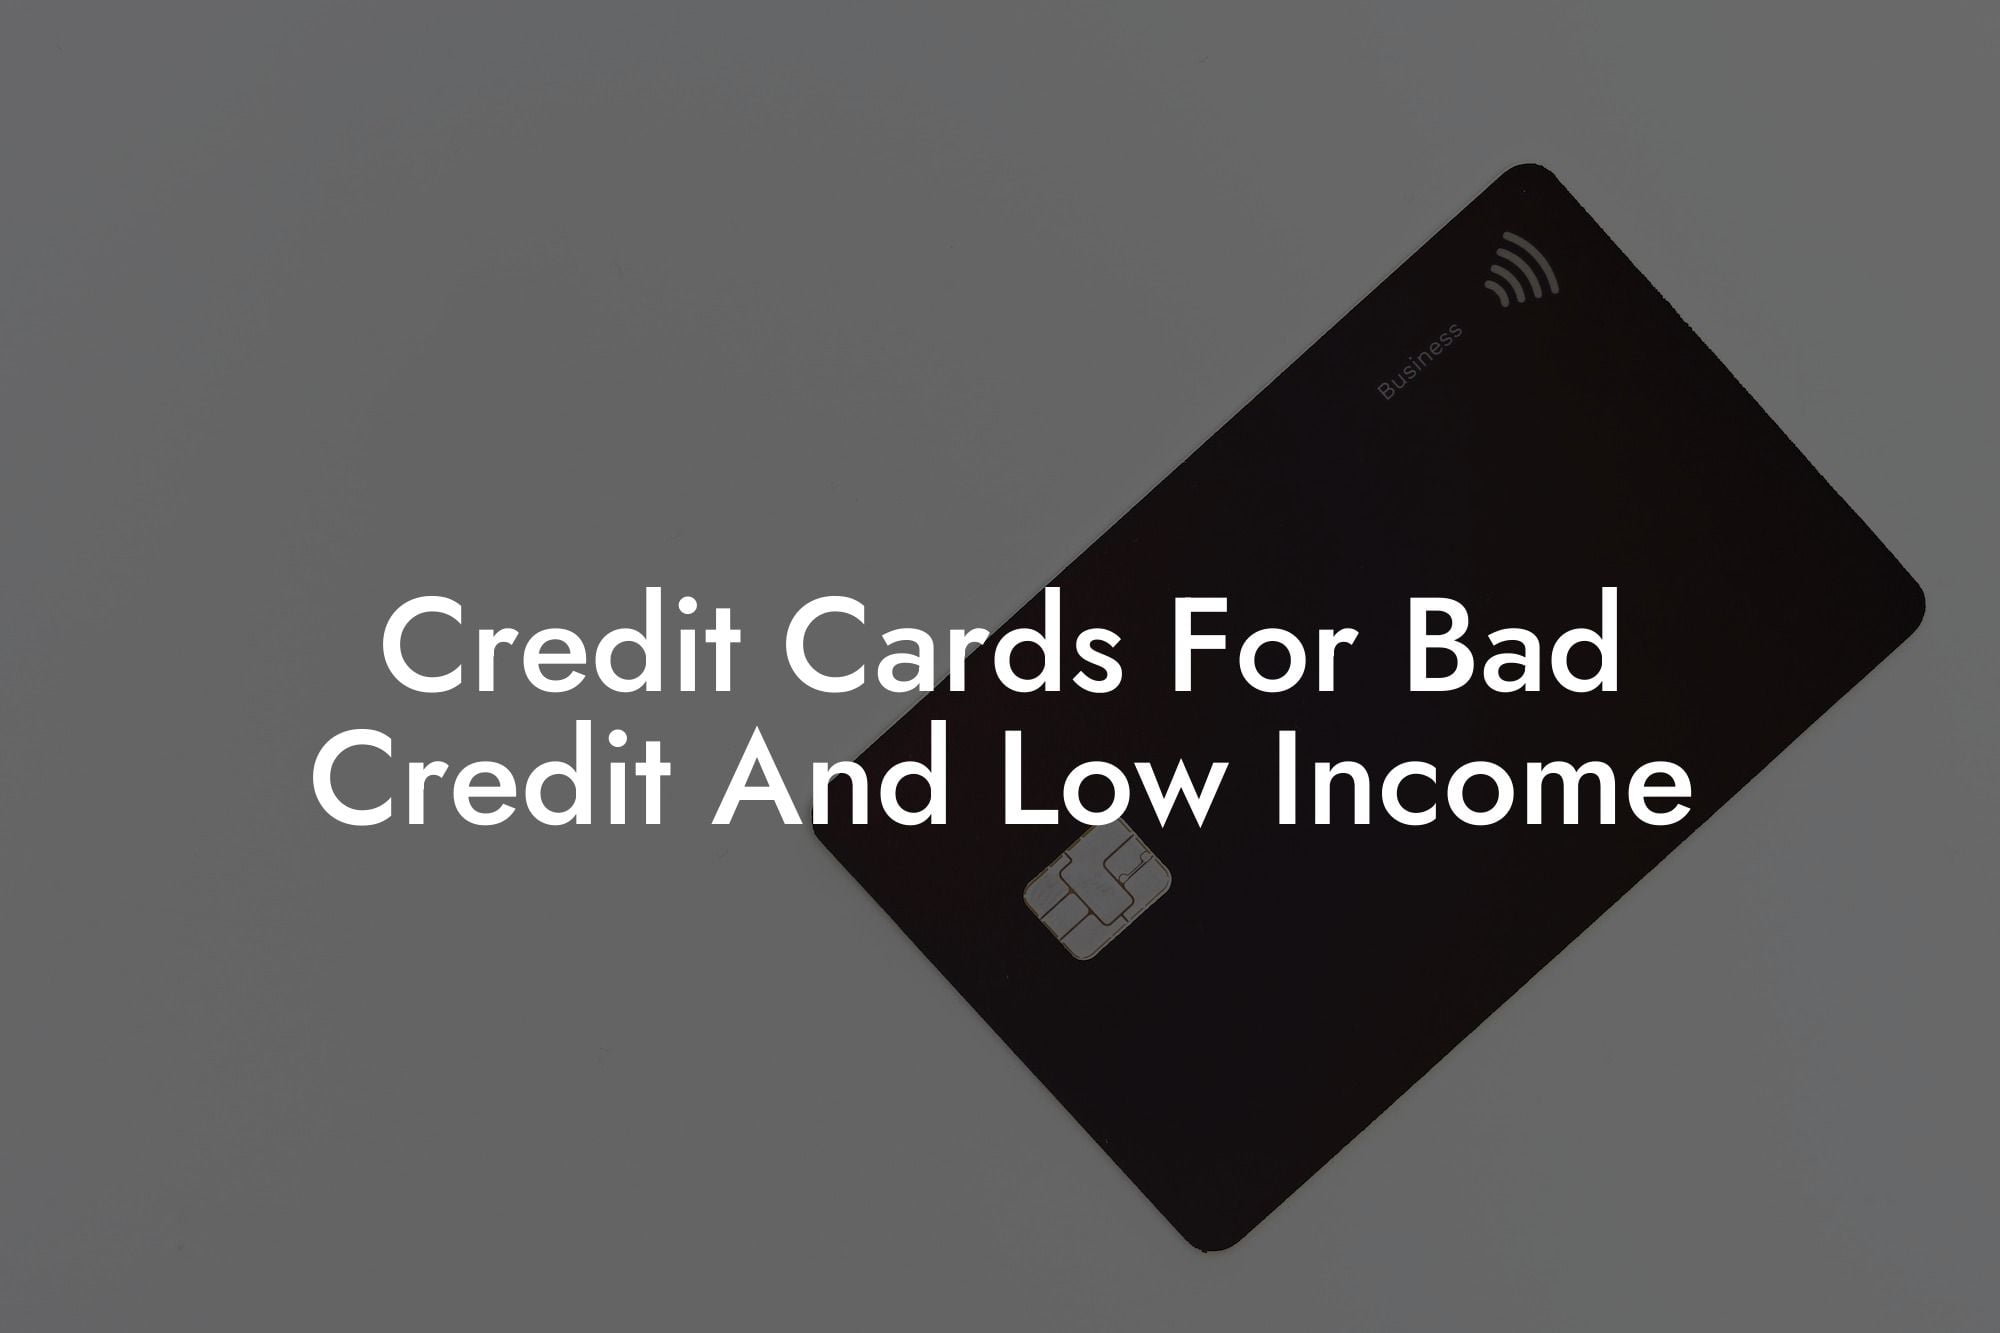 Credit Cards For Bad Credit And Low Income